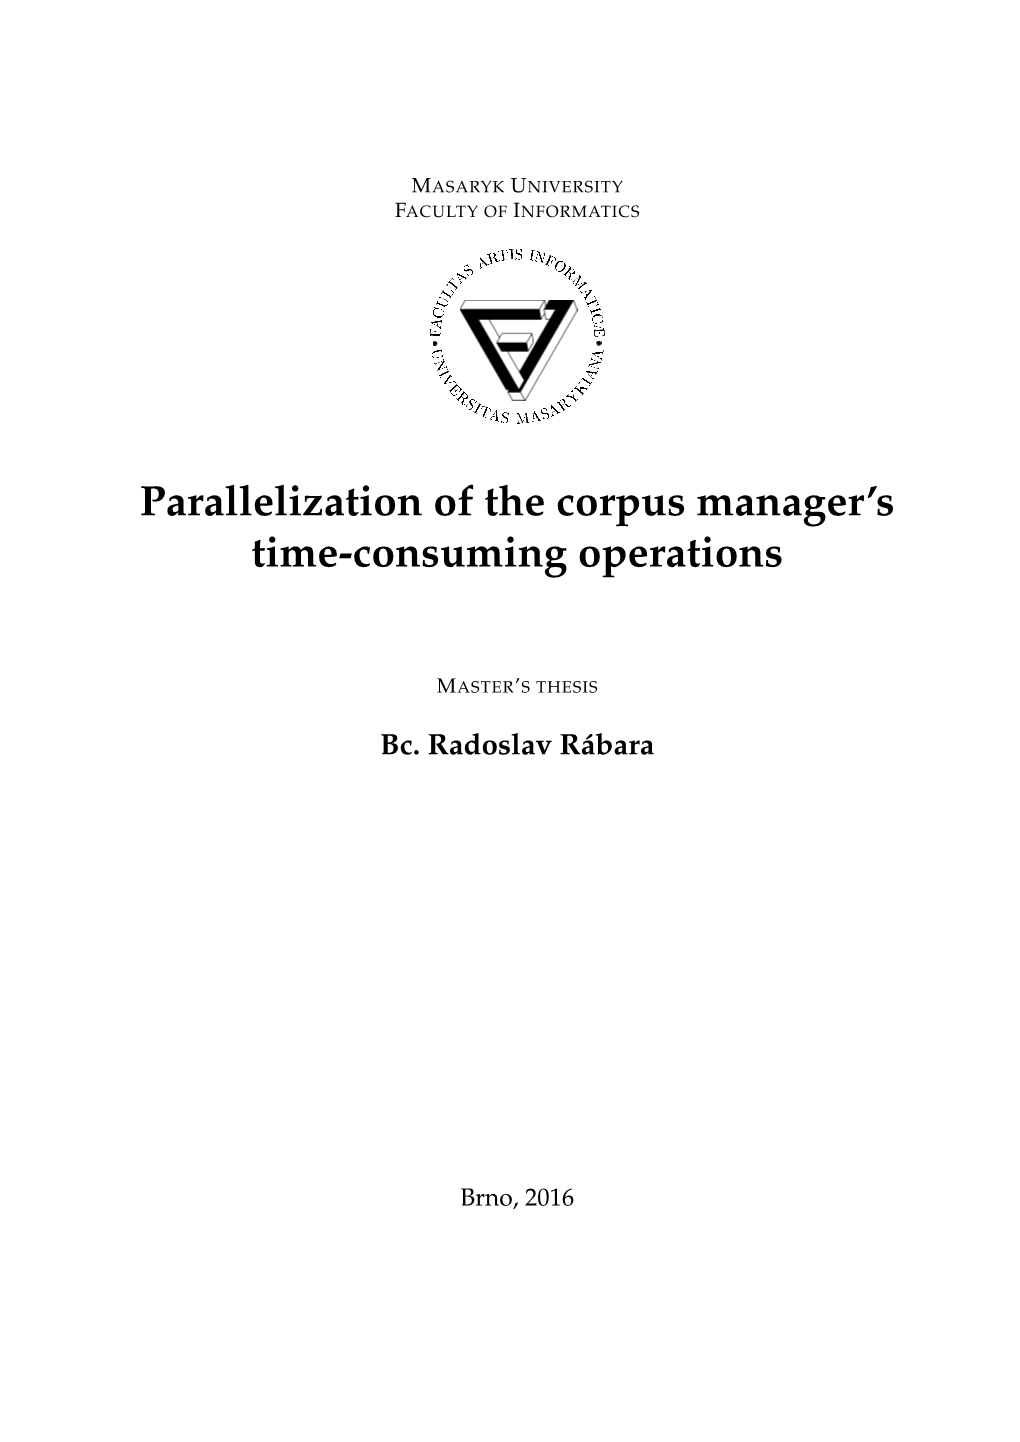 Parallelization of the Corpus Manager's Time-Consuming